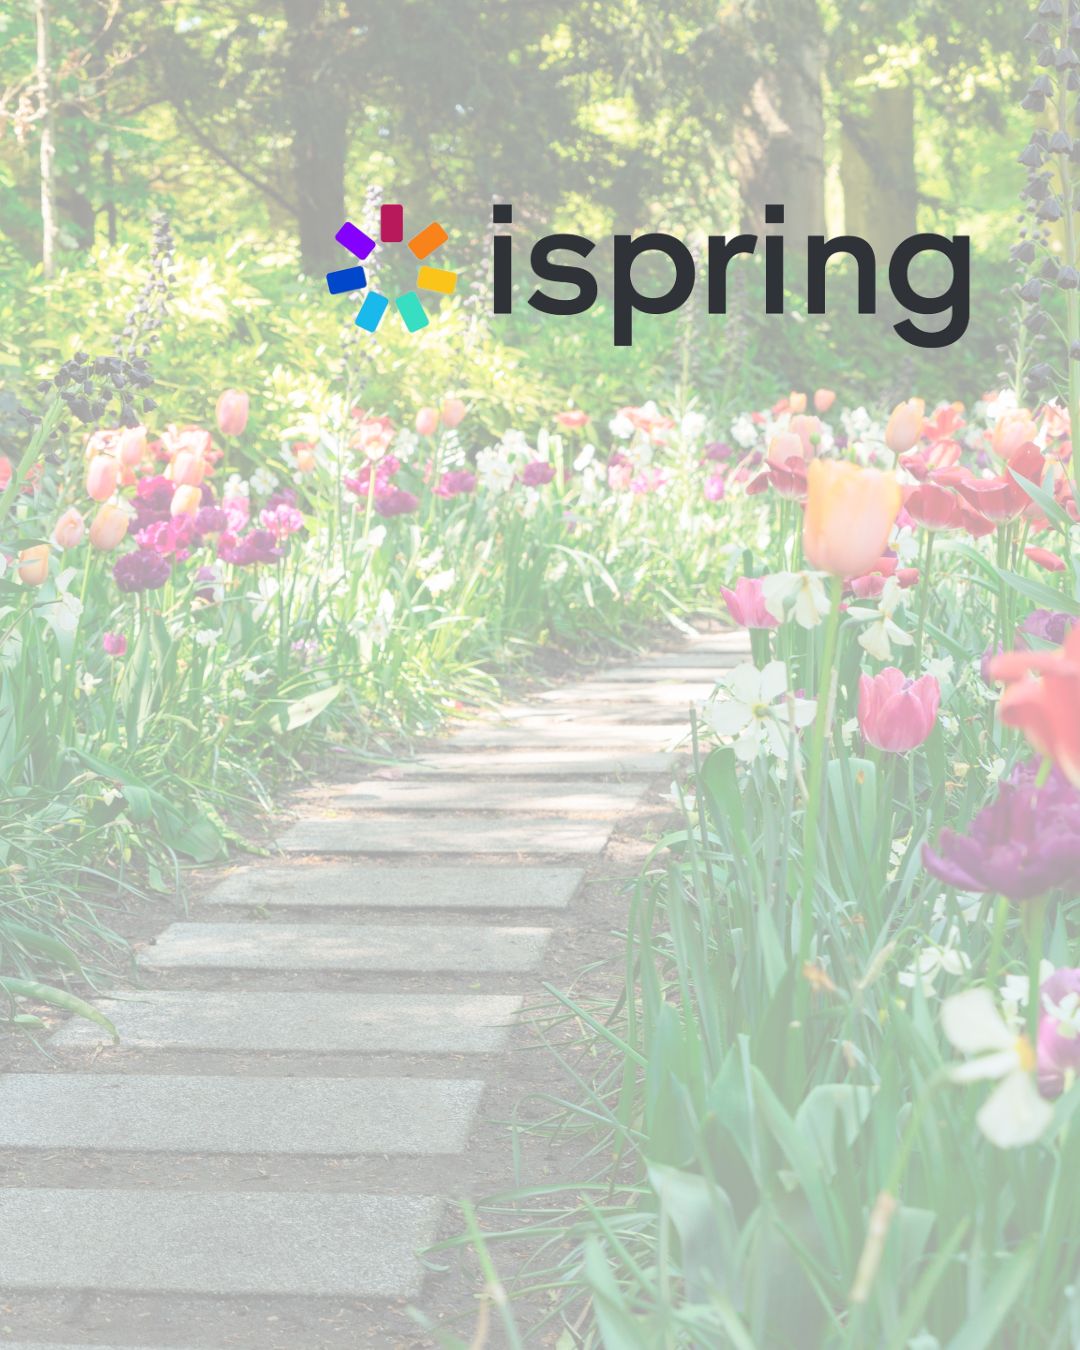 iSpring Suite 11: Boost Learning Experiences With a Brand-New Authoring Toolkit